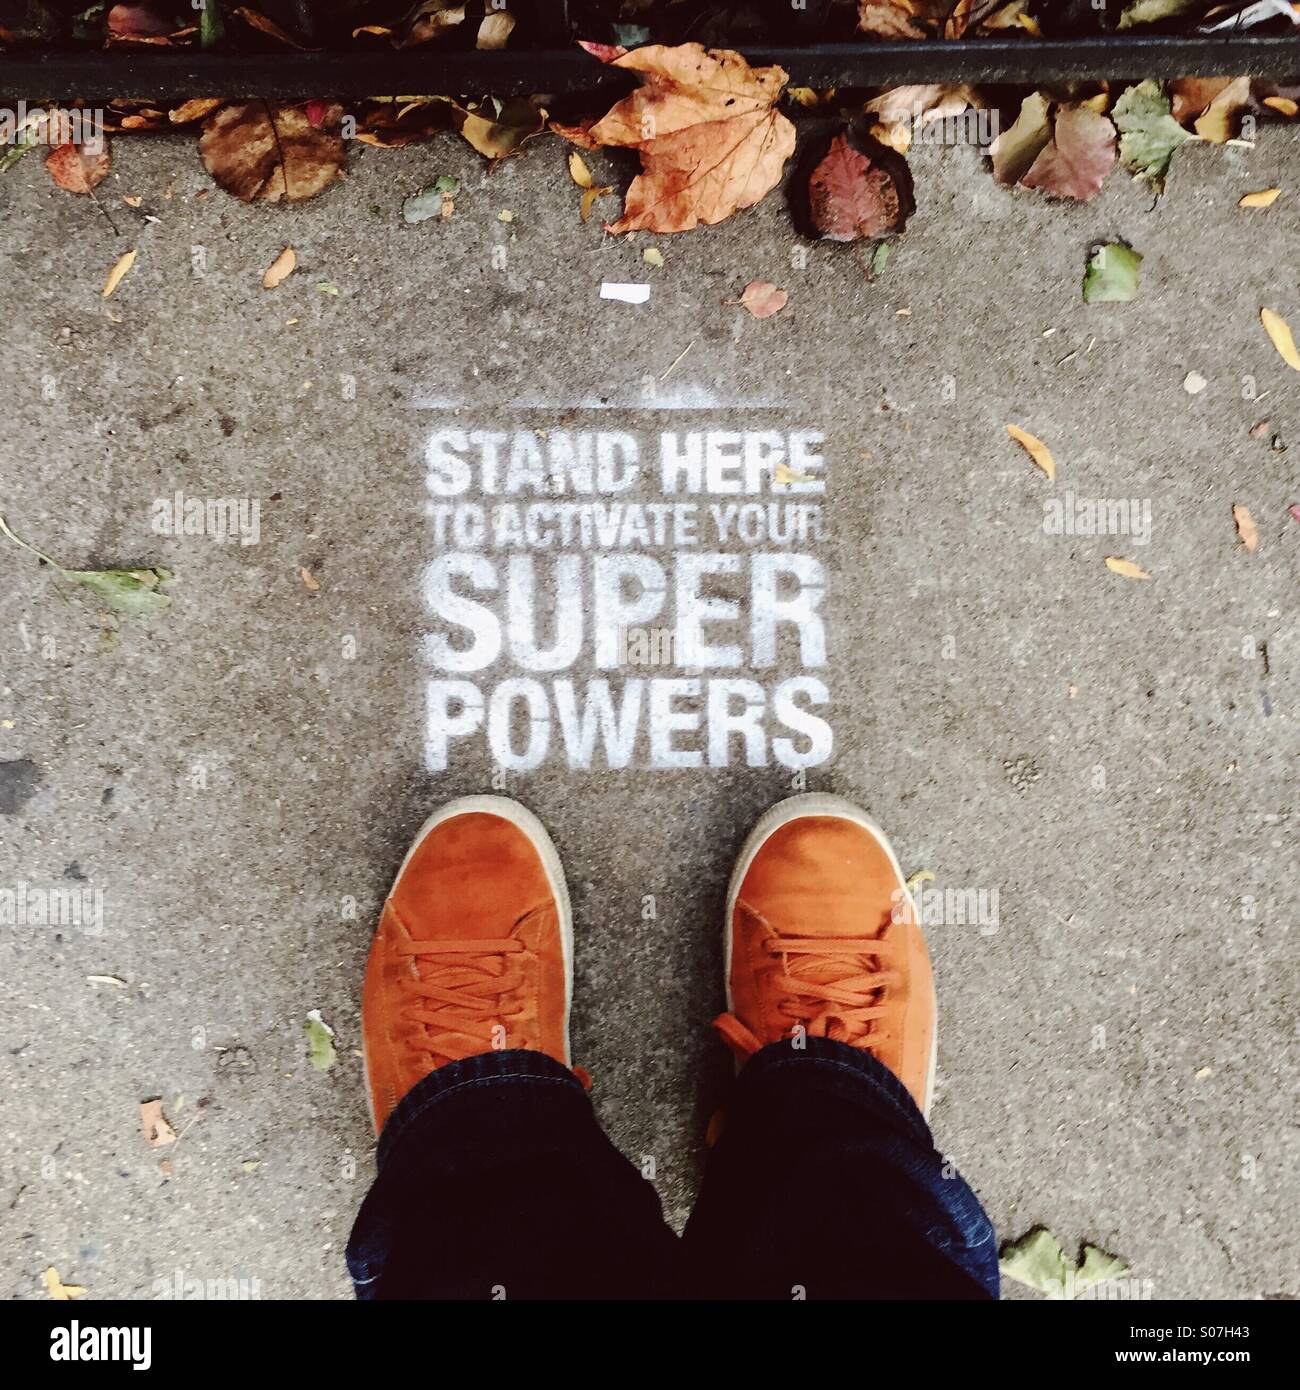 A person wearing orange shoes stands in front of stenciled graffiti that reads, 'stand here to activate your super powers' in the Chelsea neighborhood of New York City on Nov. 9, 2014. Stock Photo